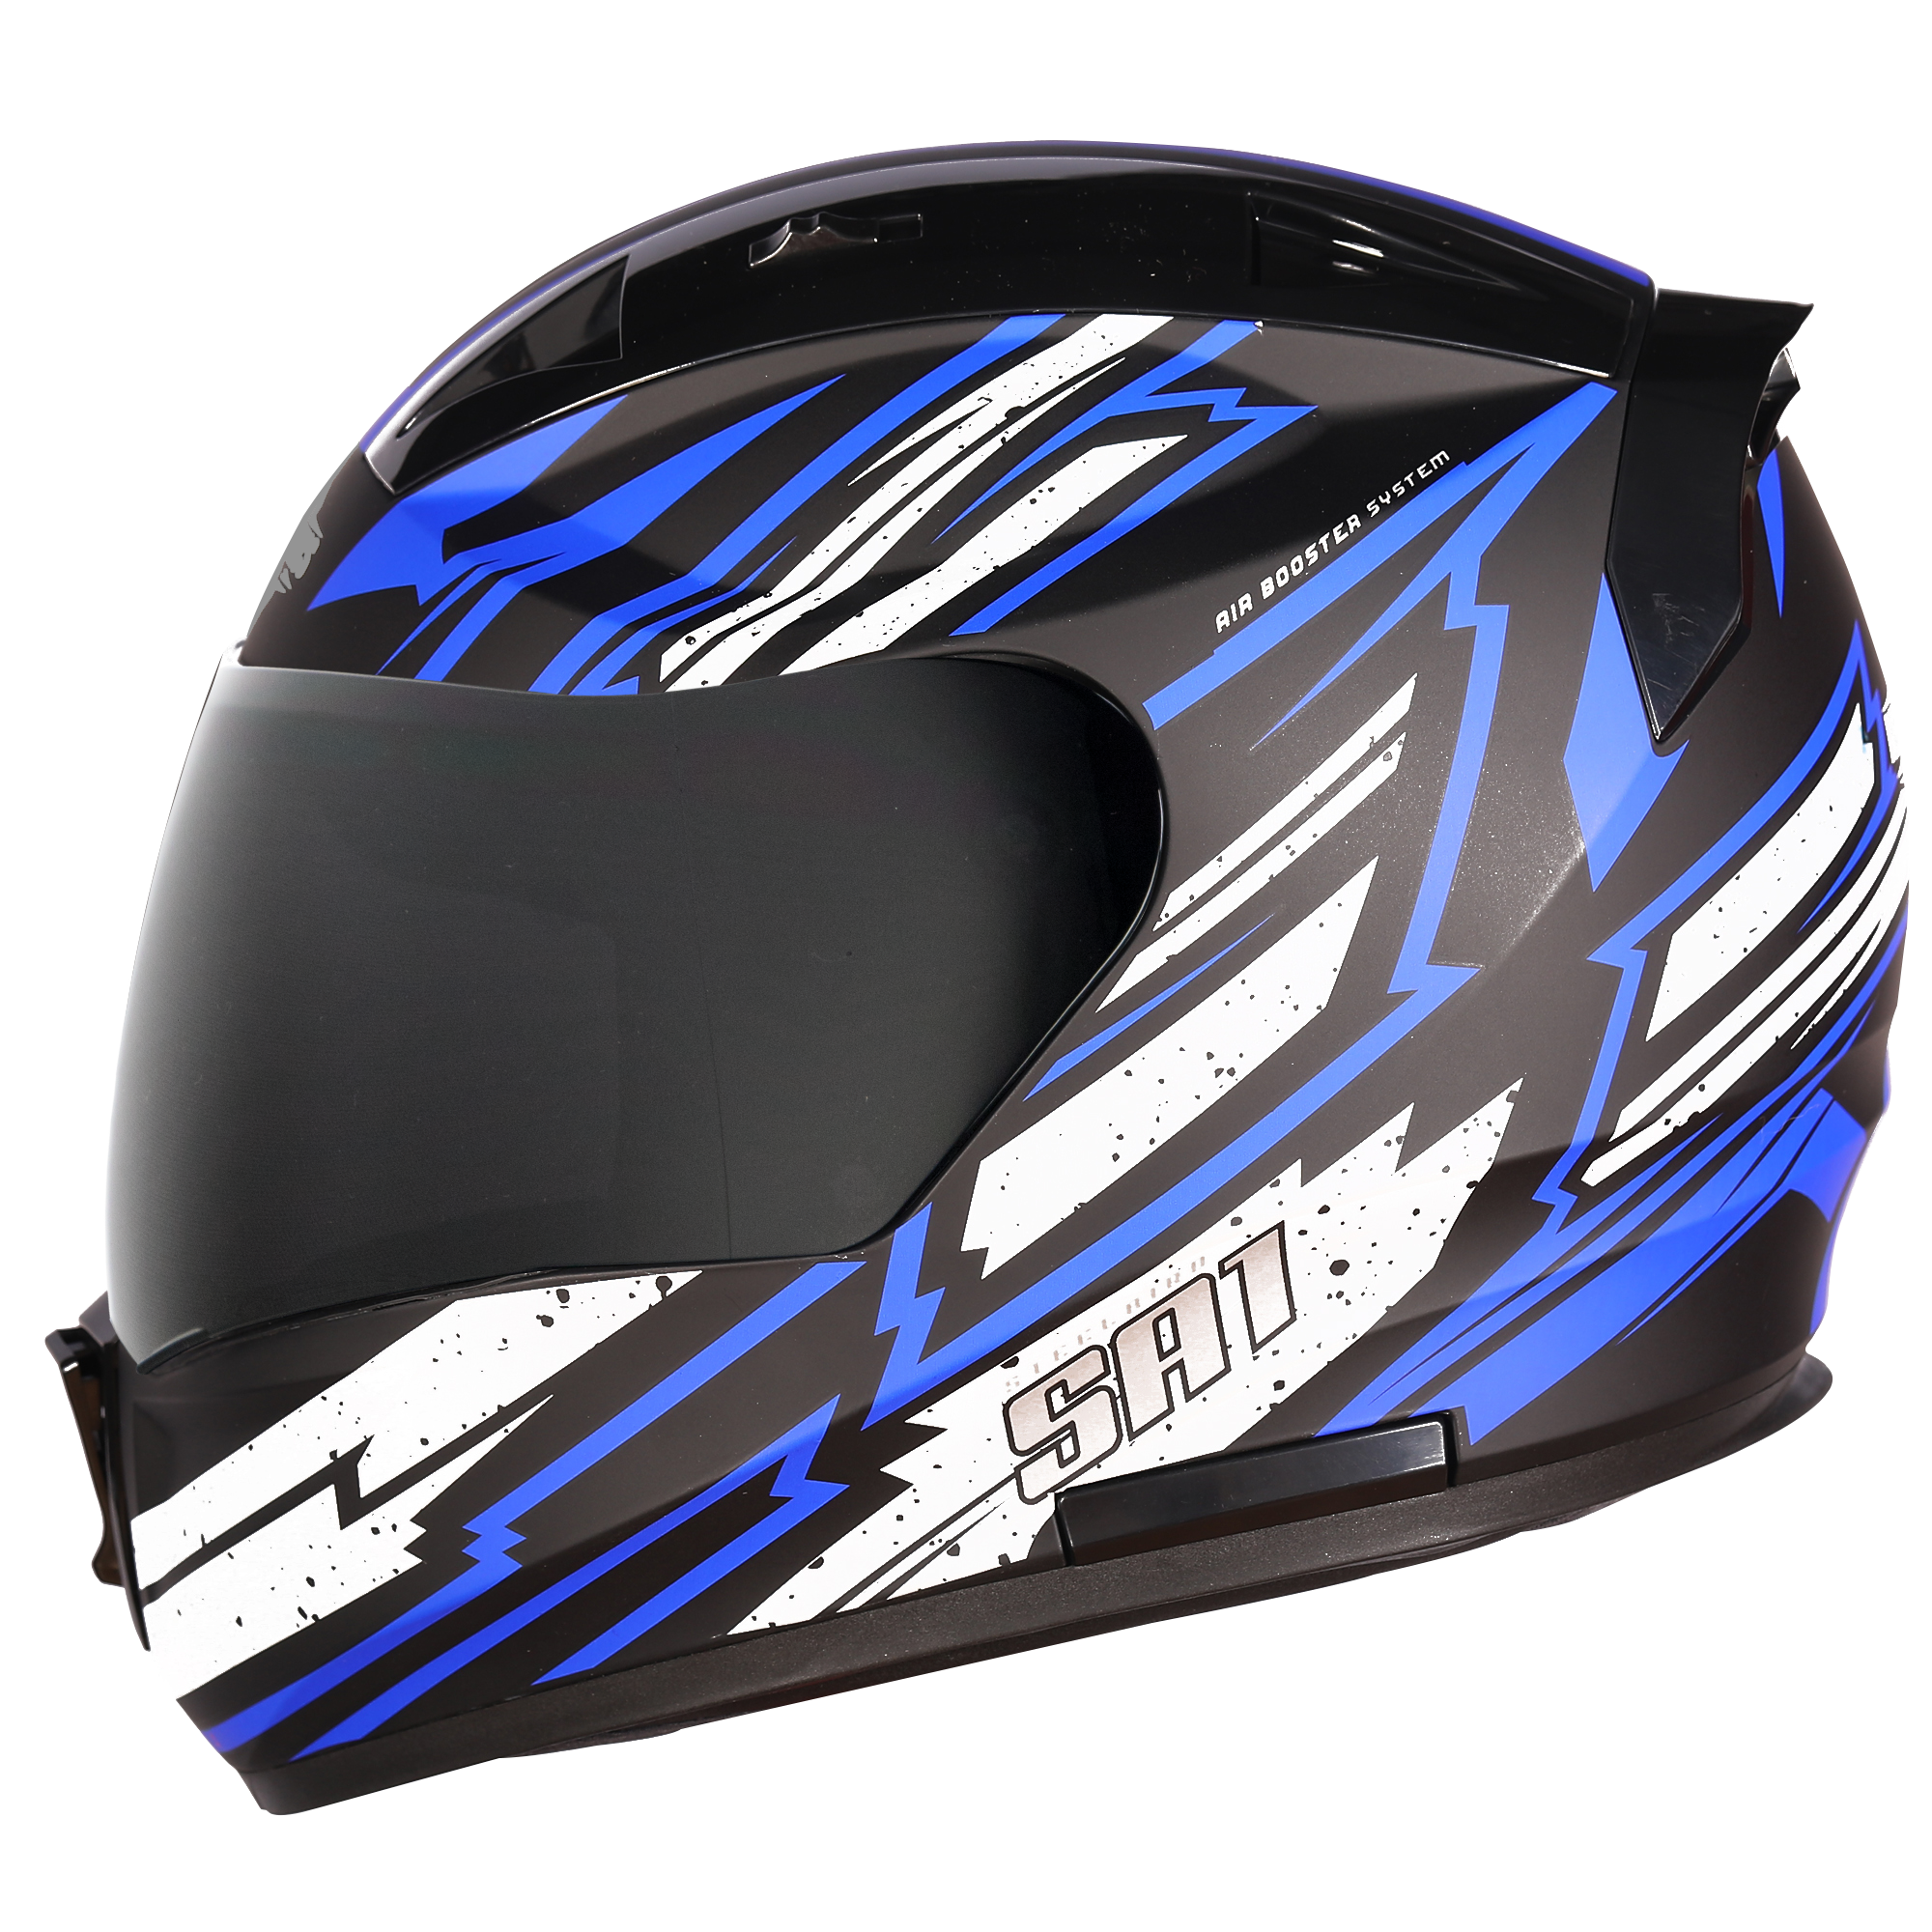 SA-1 BOOSTER MAT BLACK WITH BLUE - SMOKE VISOR (WITH EXTRA CLEAR VISOR)